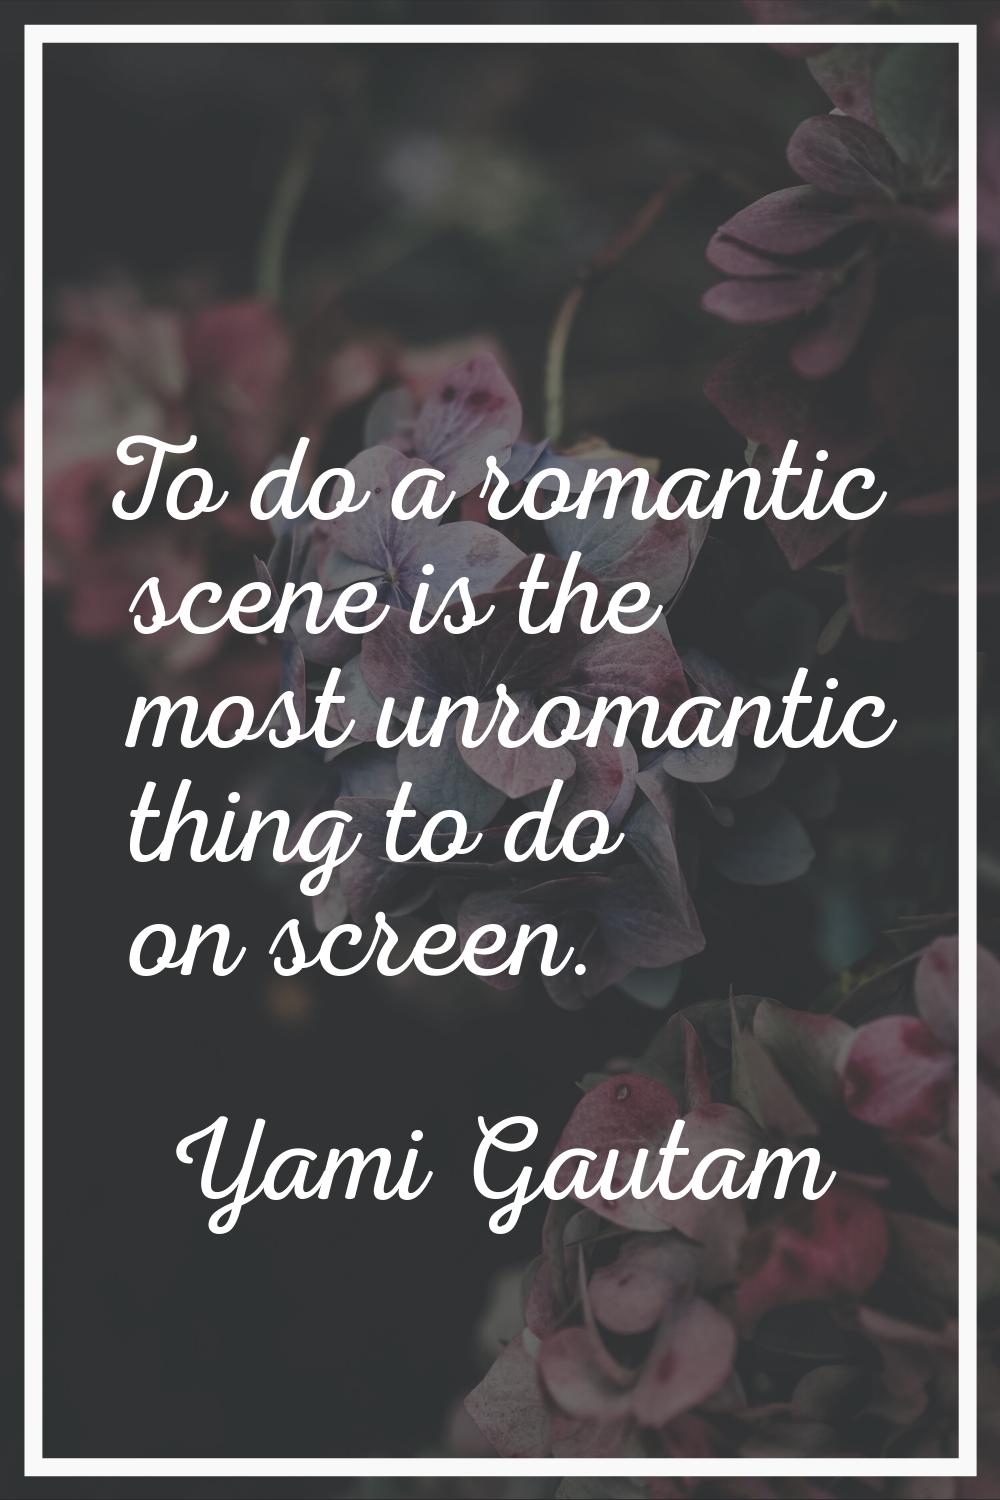 To do a romantic scene is the most unromantic thing to do on screen.